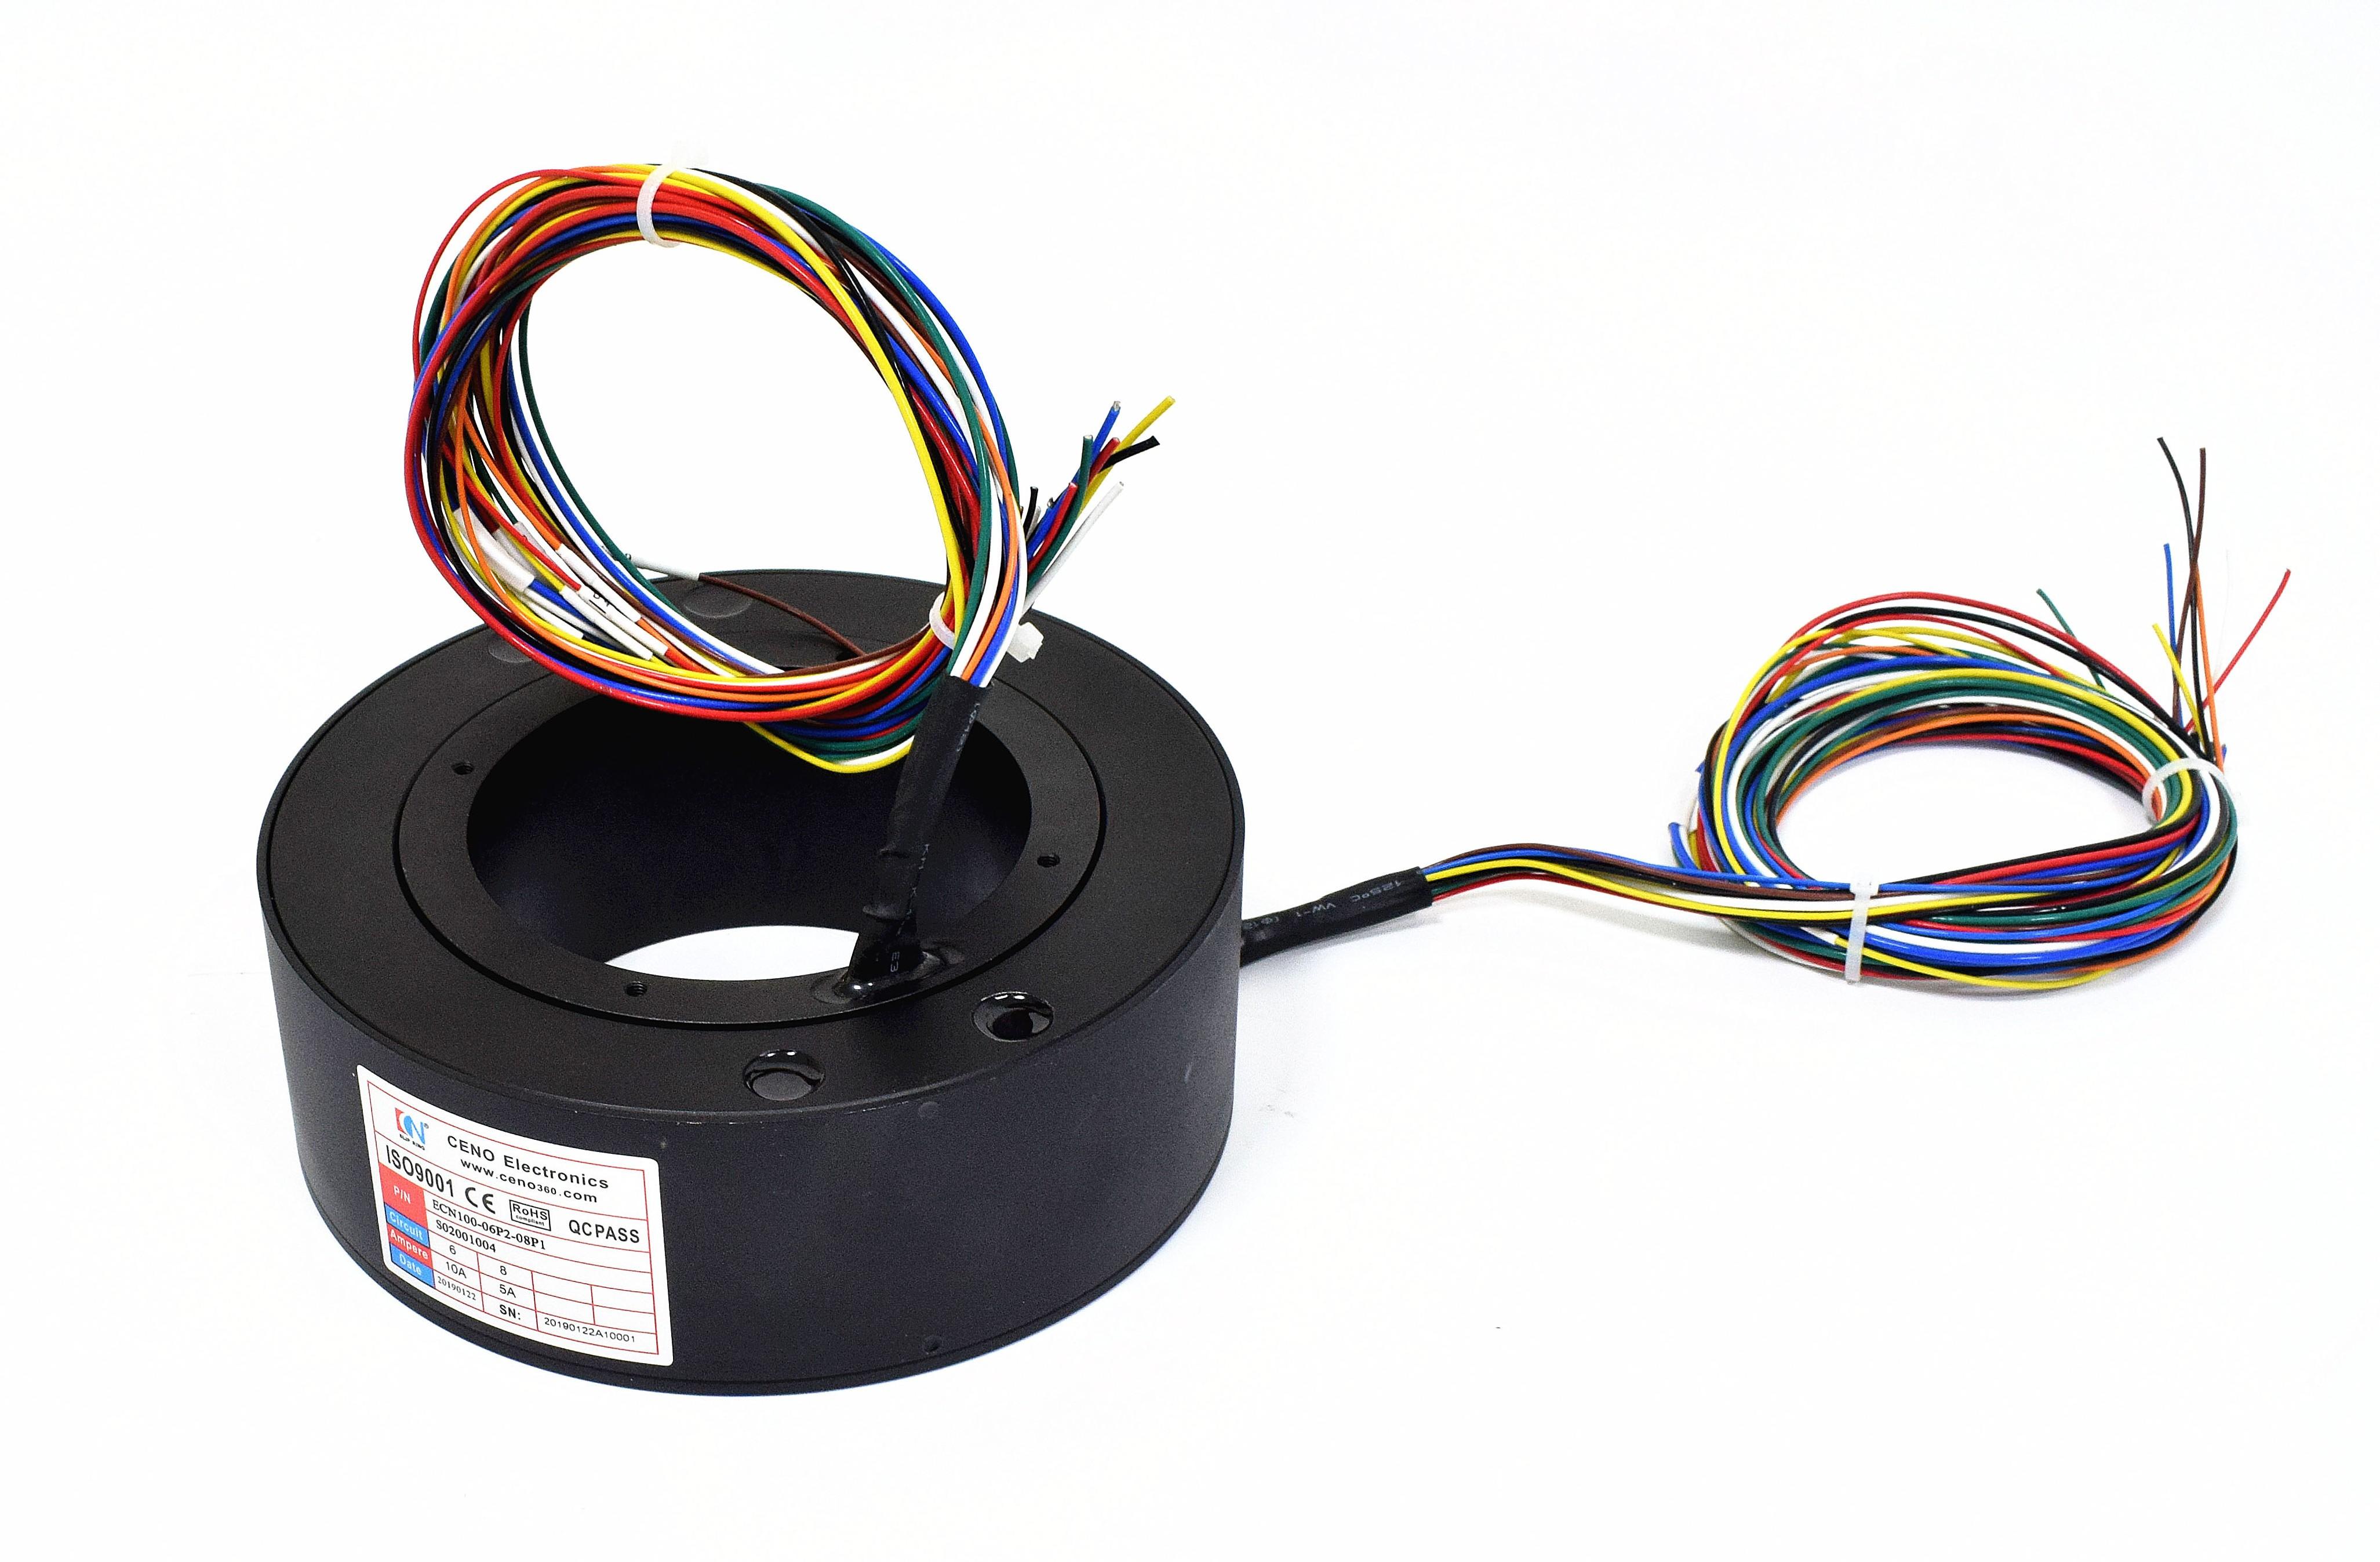 CENO Slip ring usage scenarios, structural types, and slip ring rotors are partially defined